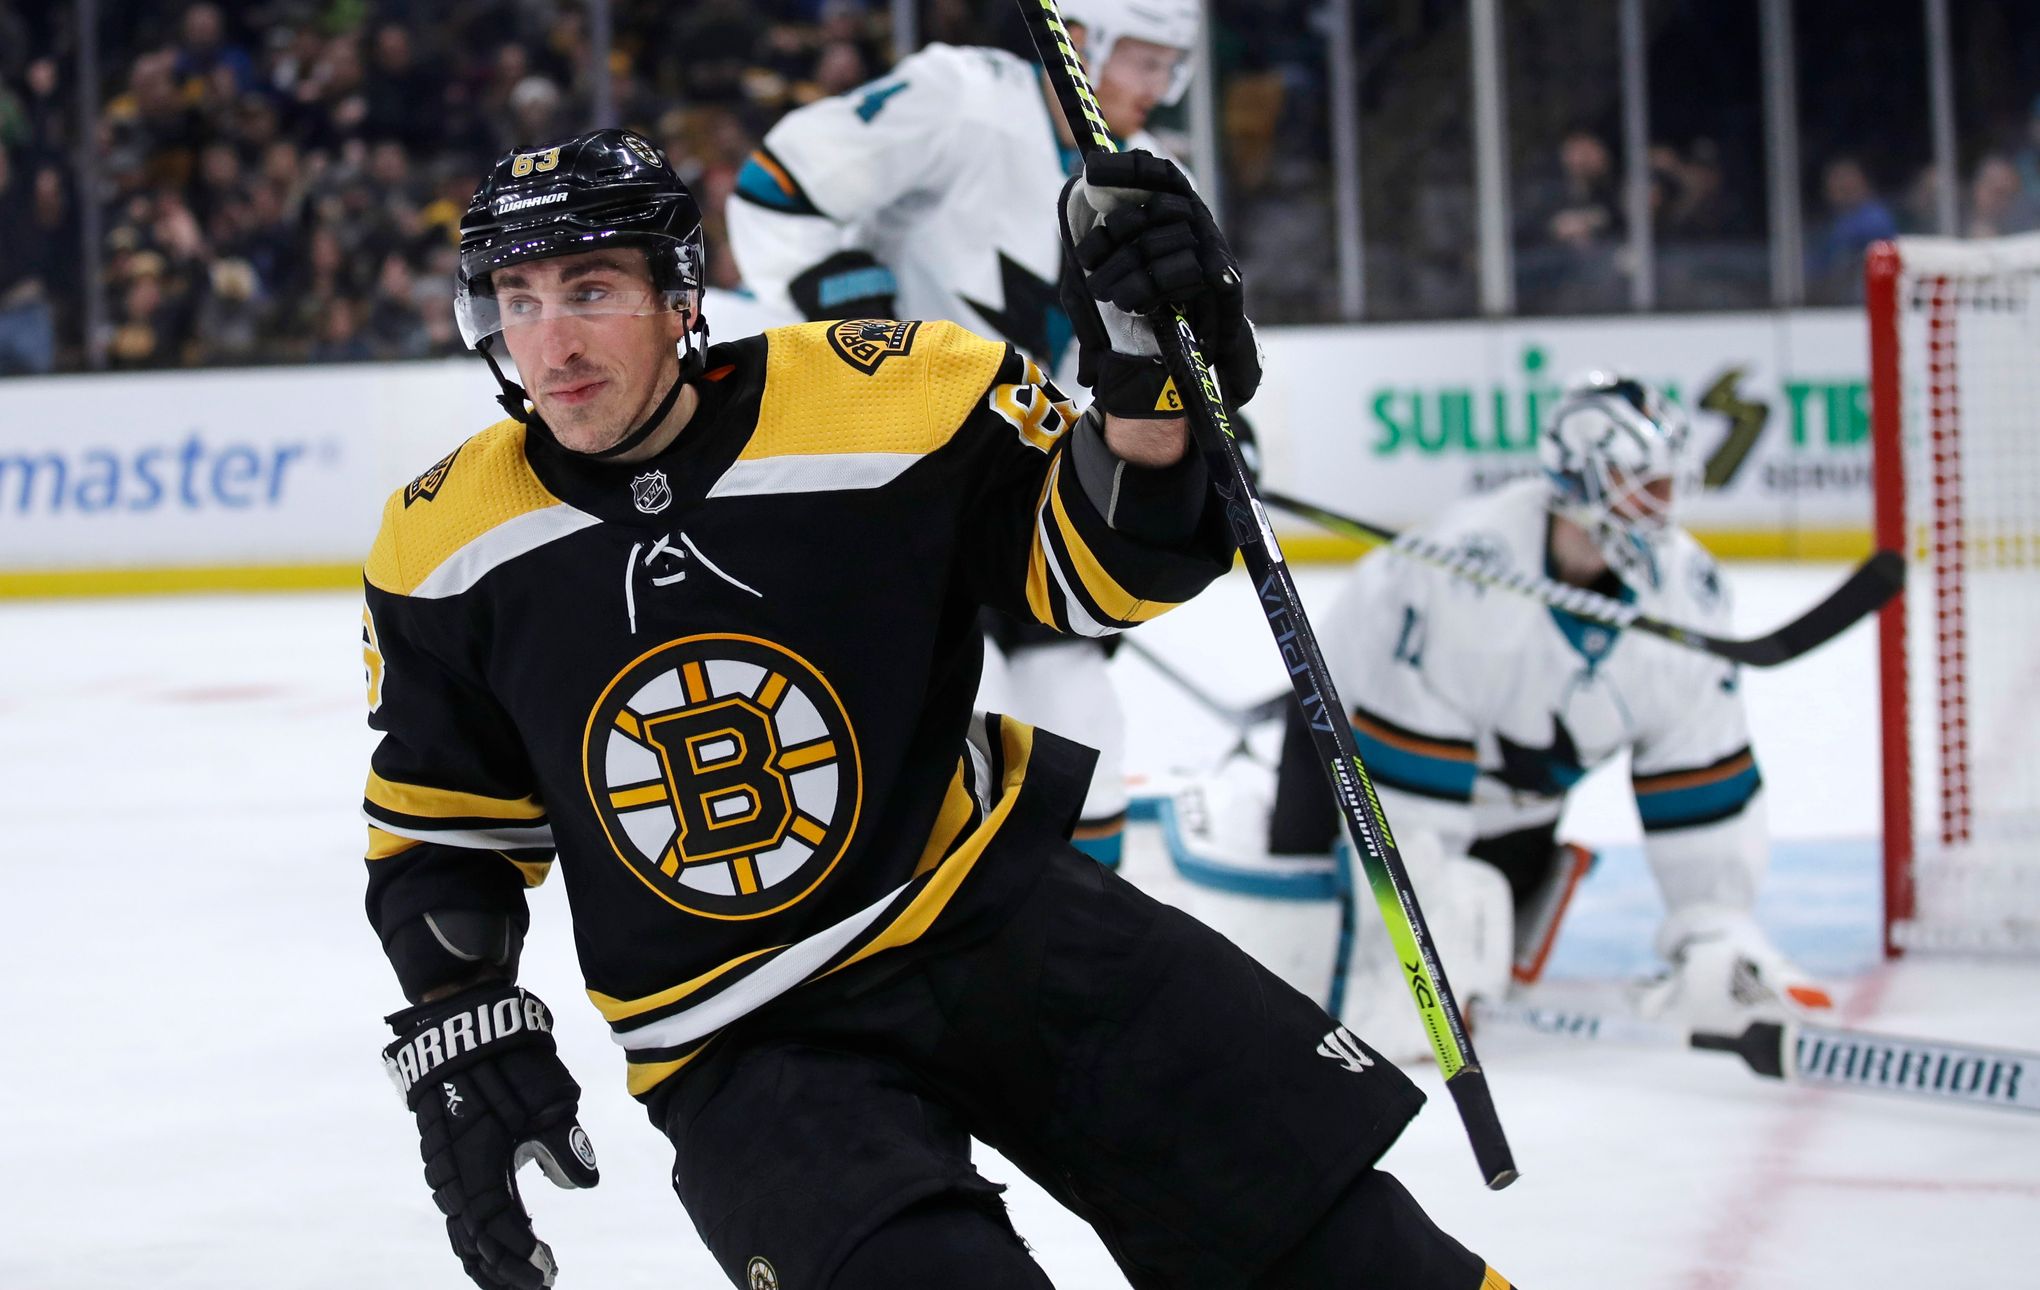 Bruins beat Sharks 3-1 for their 3rd straight win